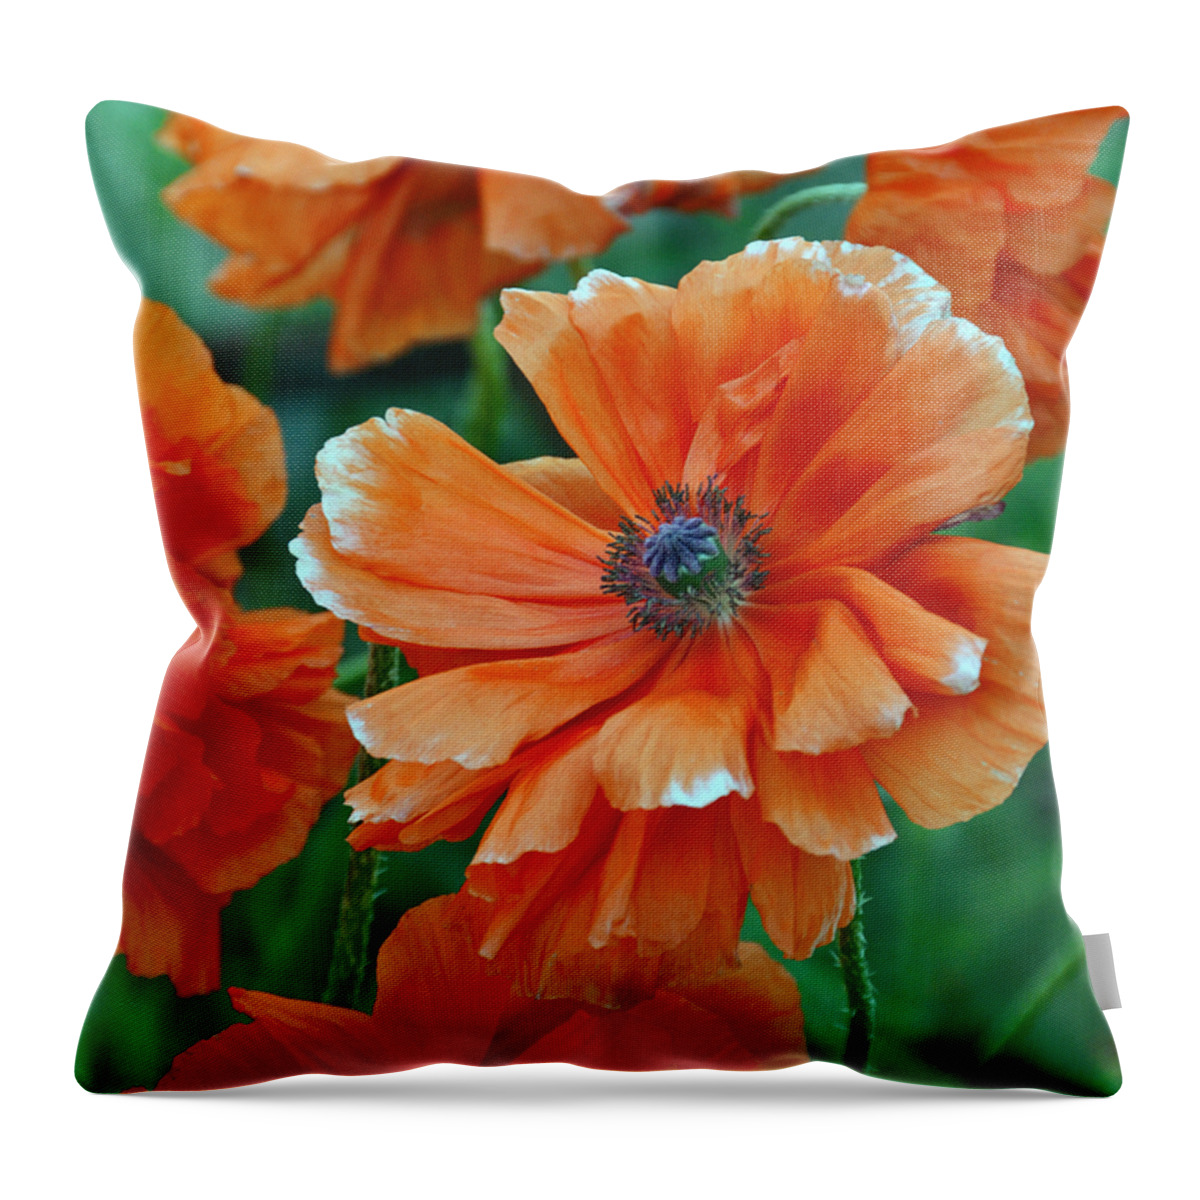 Papaver Somniferum. Opium Throw Pillow featuring the photograph Poppy Fields by Angelina Tamez